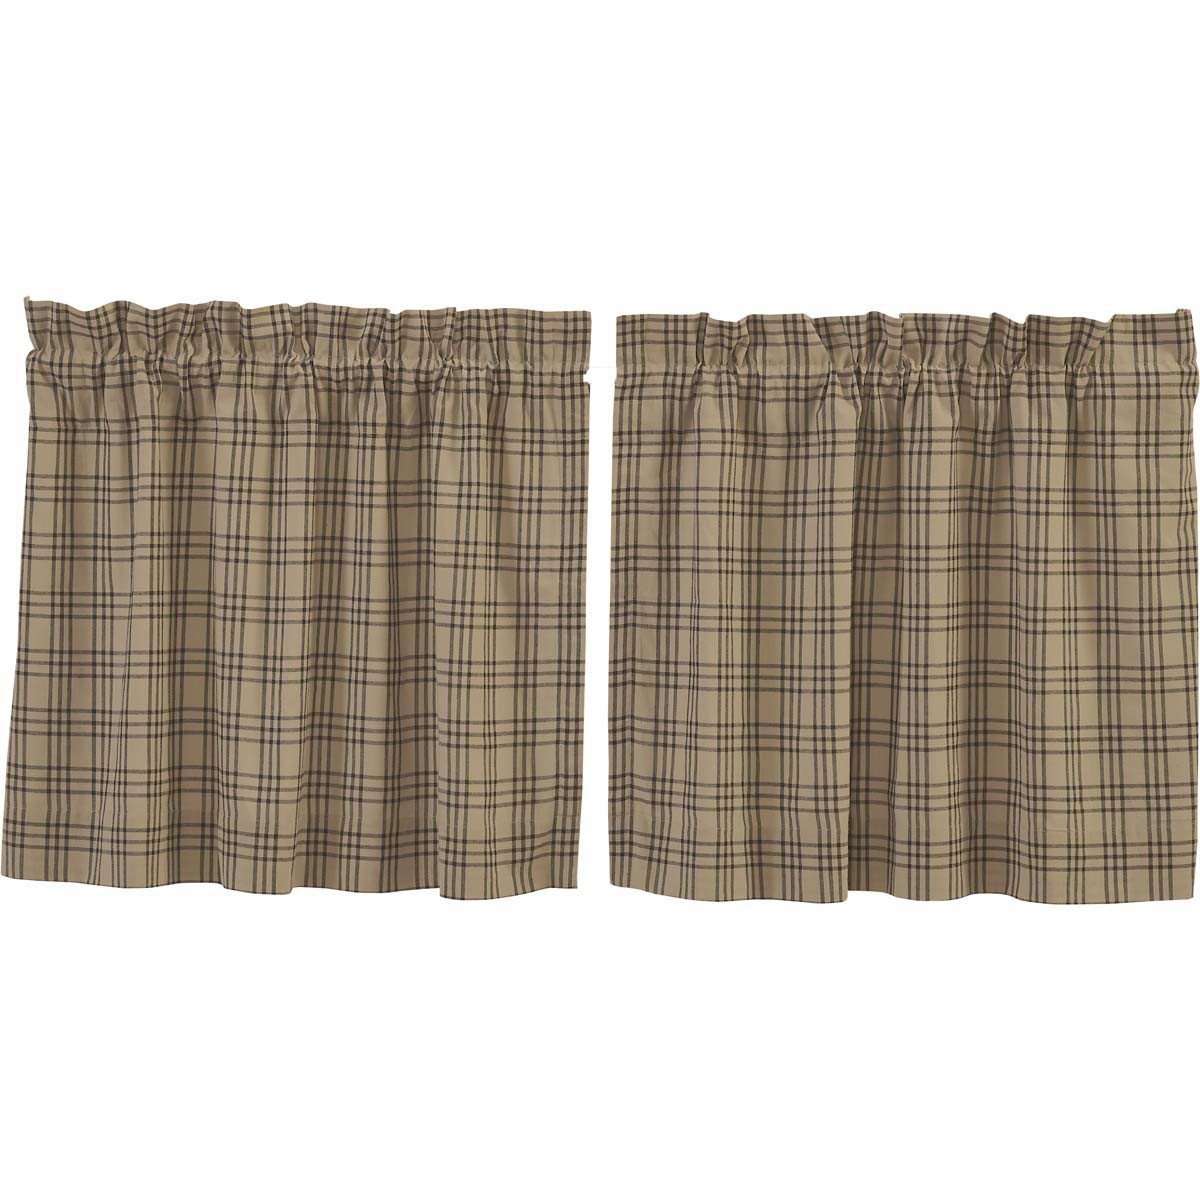 Sawyer Mill Charcoal Plaid Tier Curtain Set VHC Brands - The Fox Decor